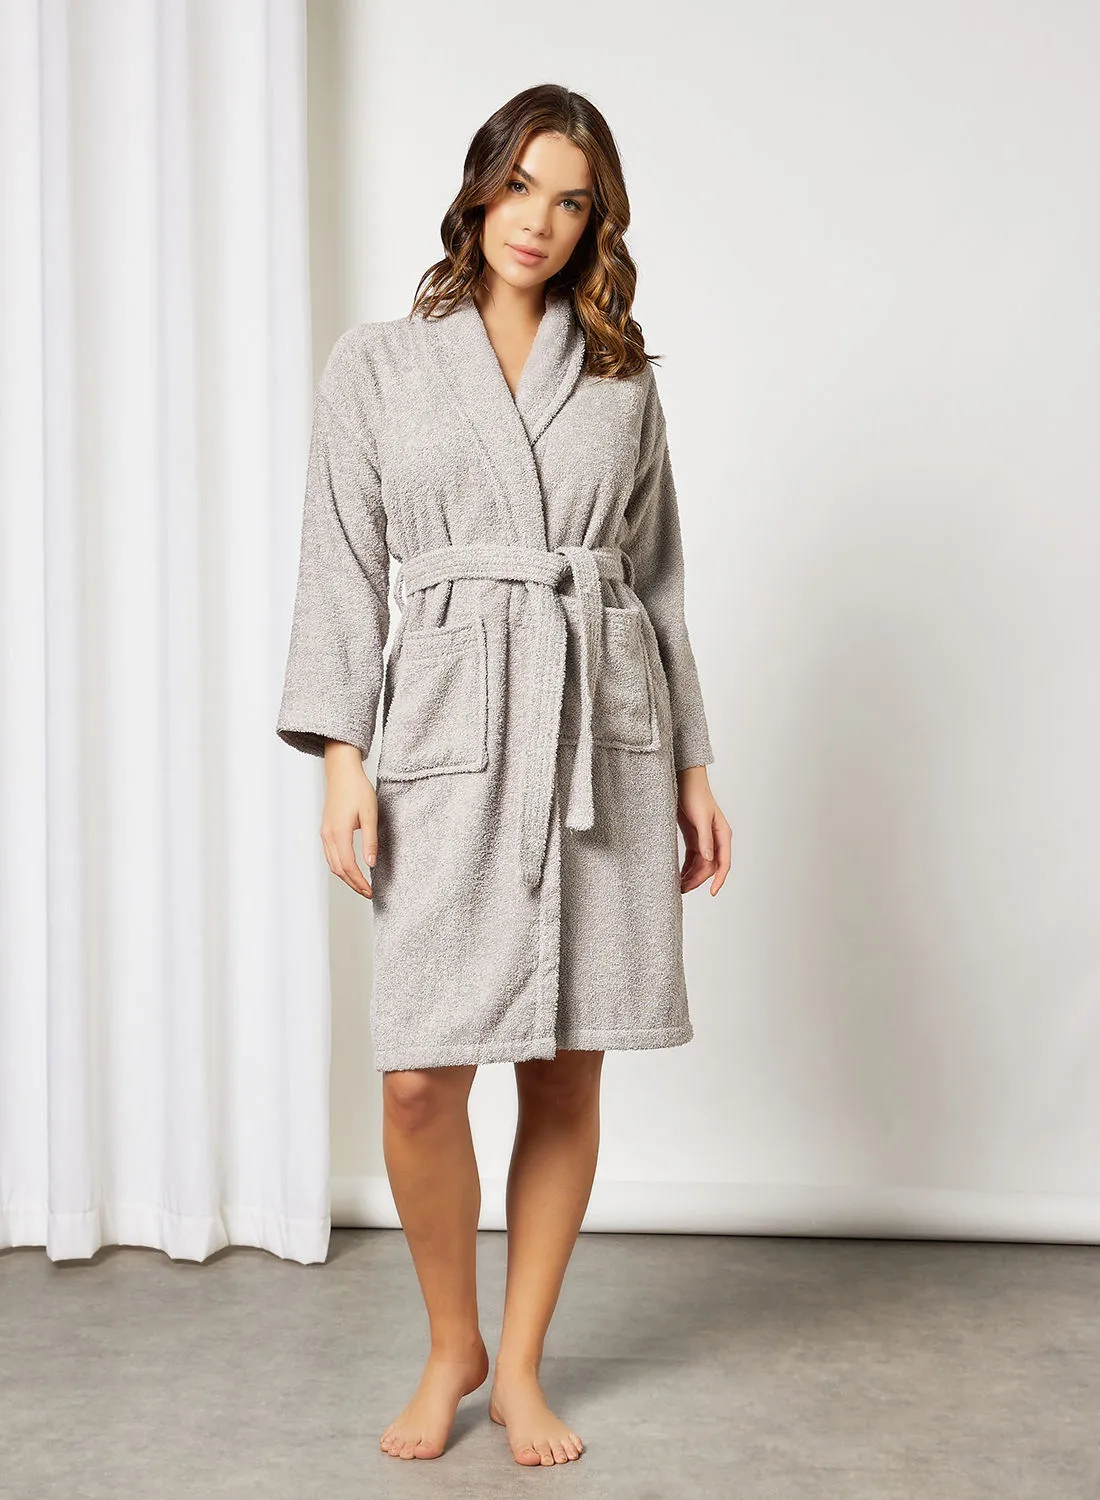 noon east Bathrobe - 400 GSM 100% Cotton Terry Silky Soft Spa Quality Comfort - Shawl Collar & Pocket - Grey Color - 1 Piece